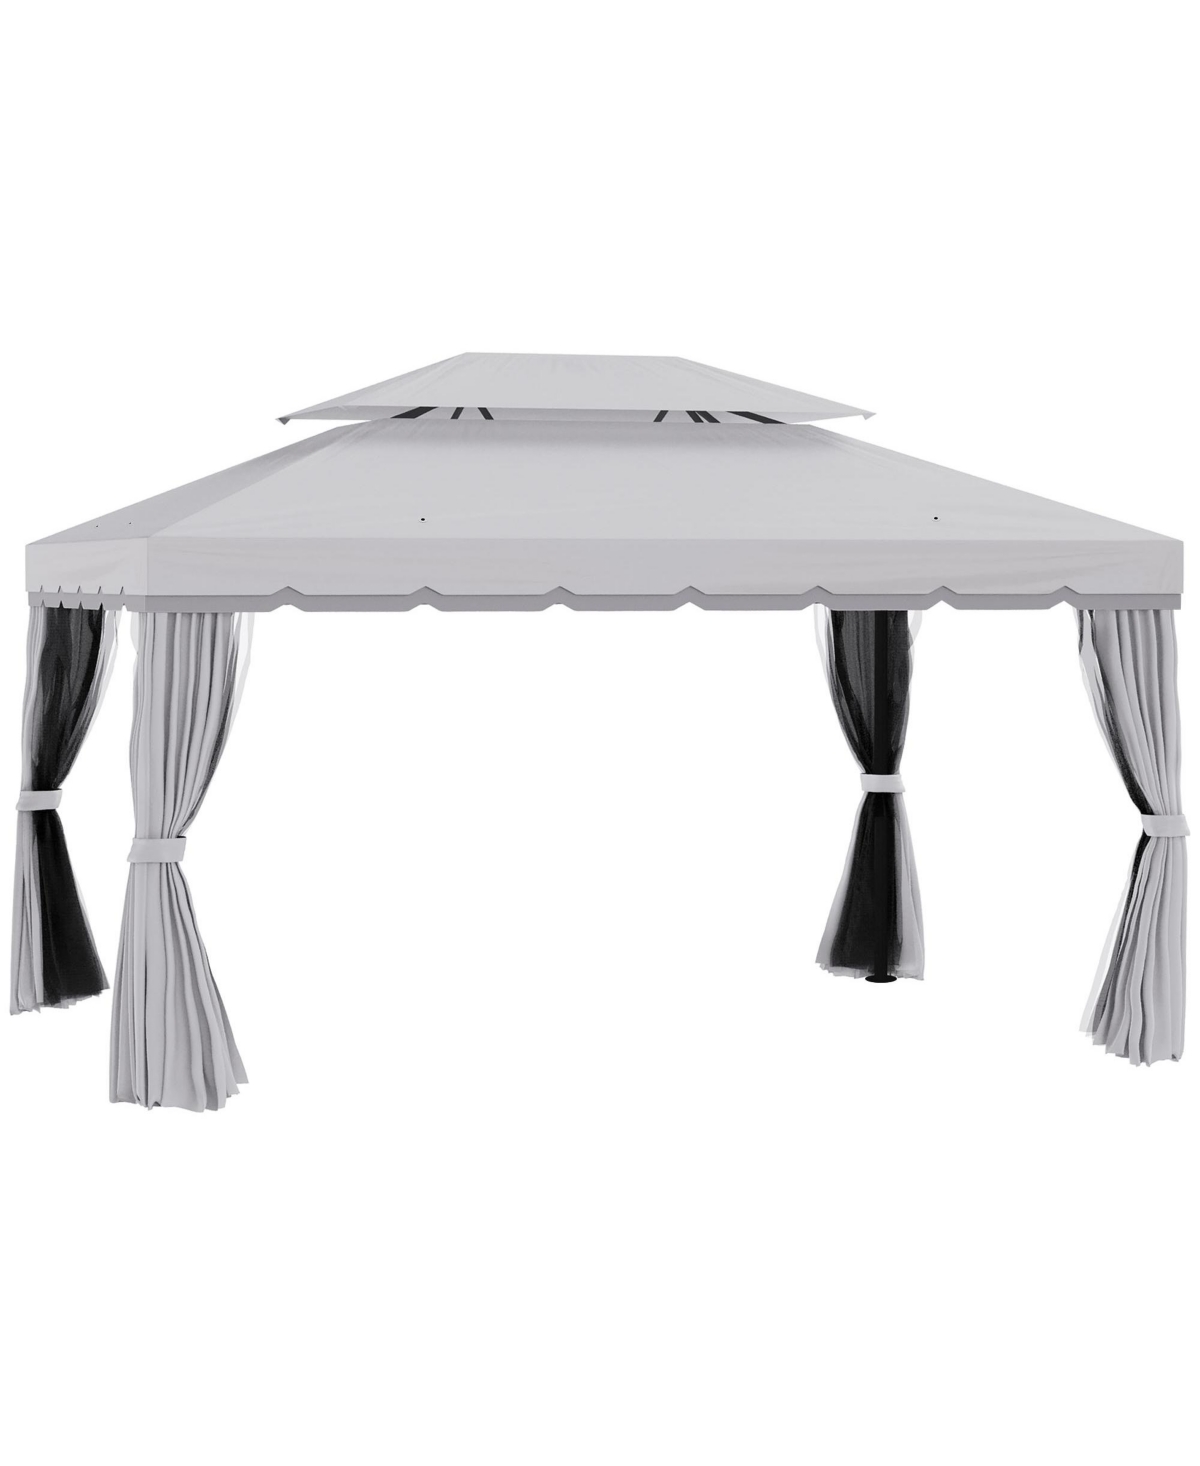 10' x 13' Patio Gazebo, 2-Tier Polyester Roof, Vented Canopy, Mesh, Portable Aluminum Frame for Outdoor, Grey - Grey